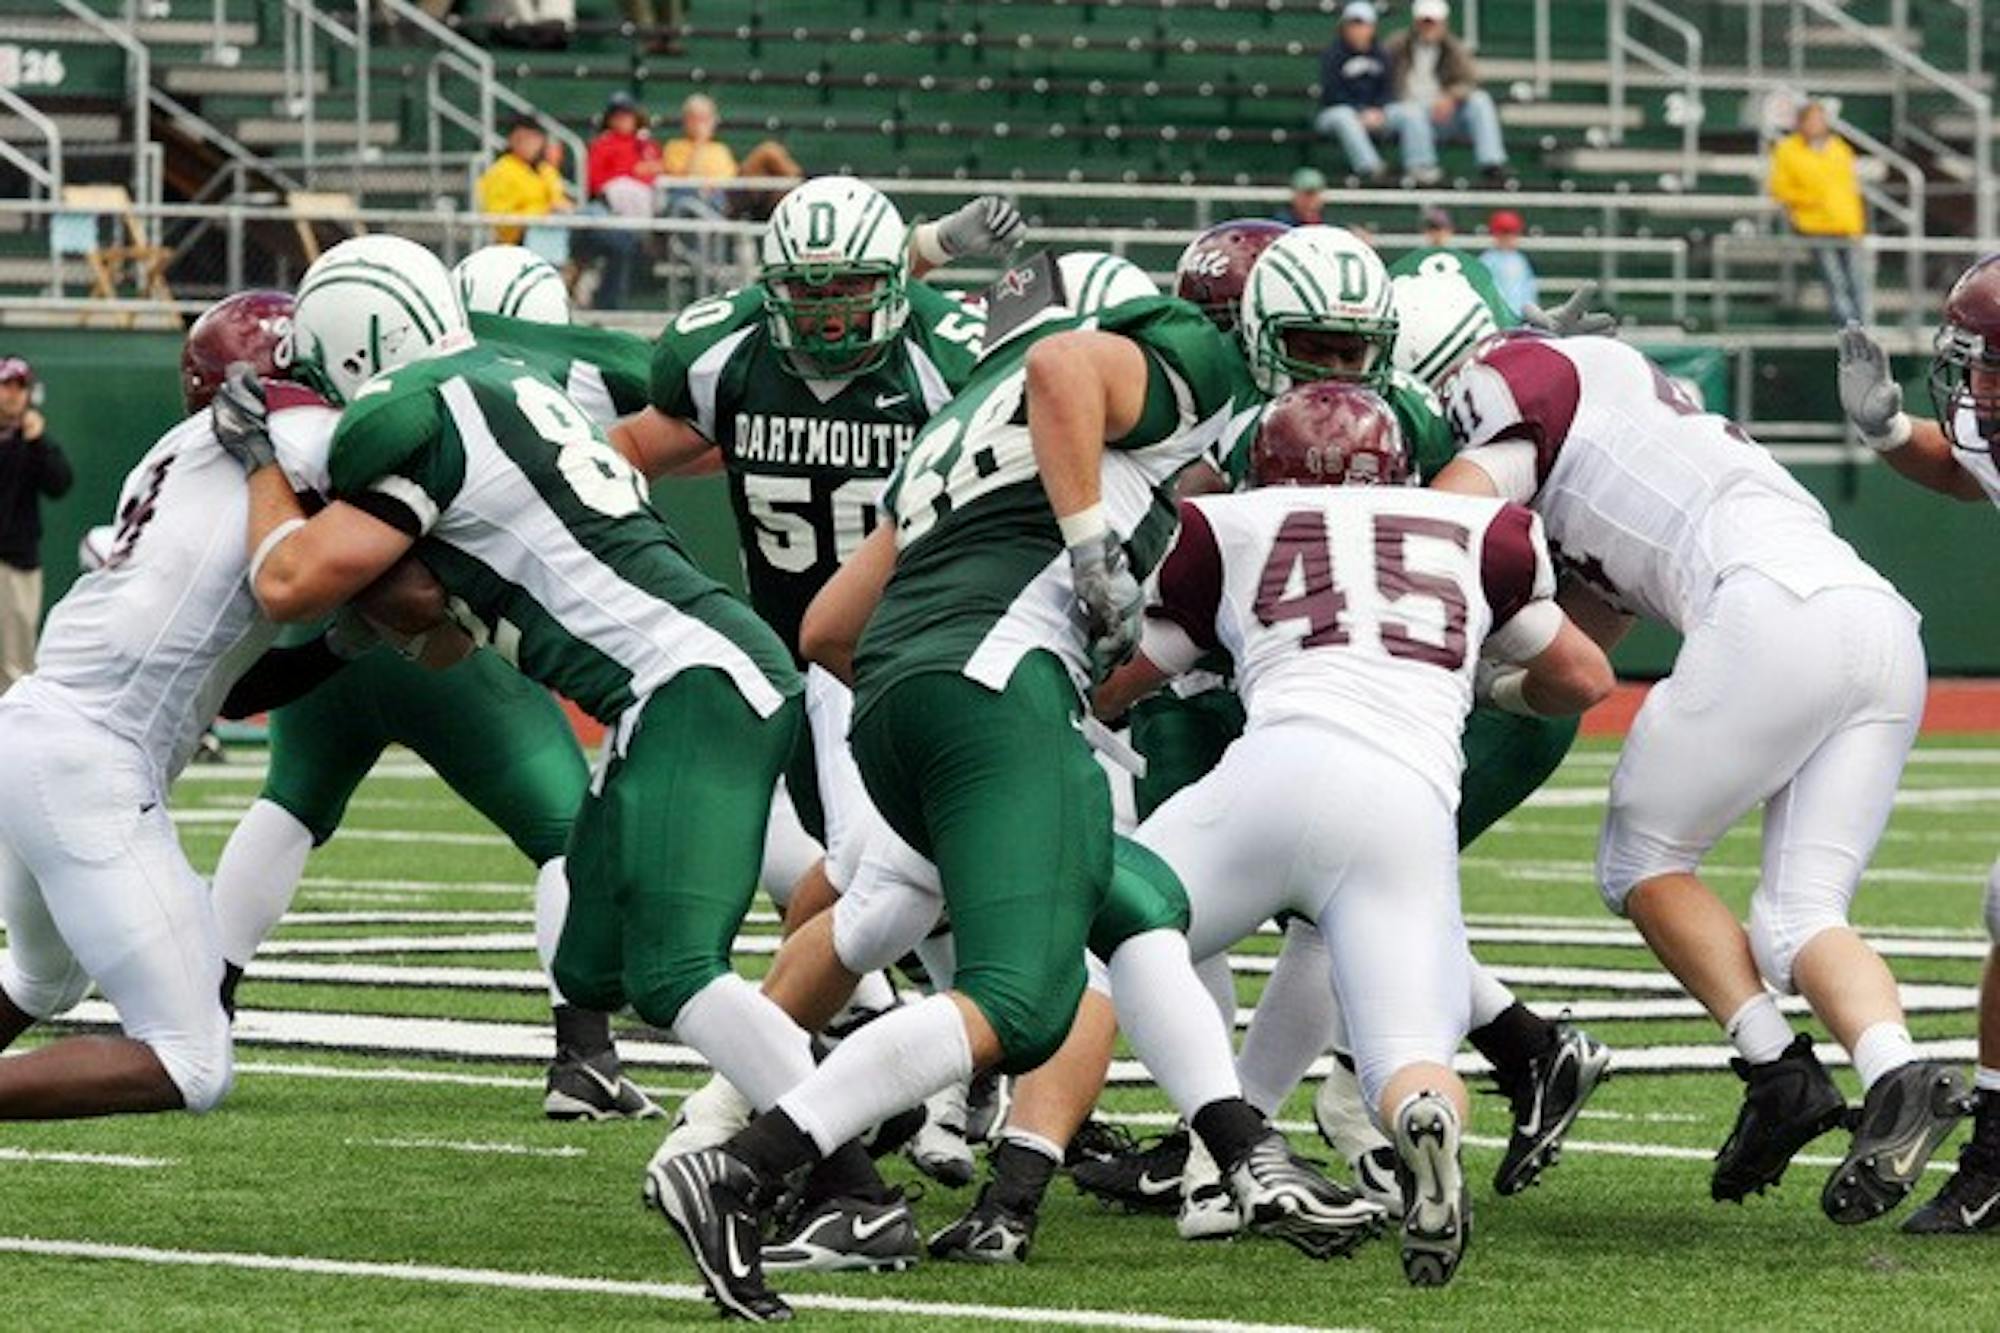 The Big Green tallied 31 points but dropped an eighth consecutive Granite Bowl at in-state rival New Hampshire.